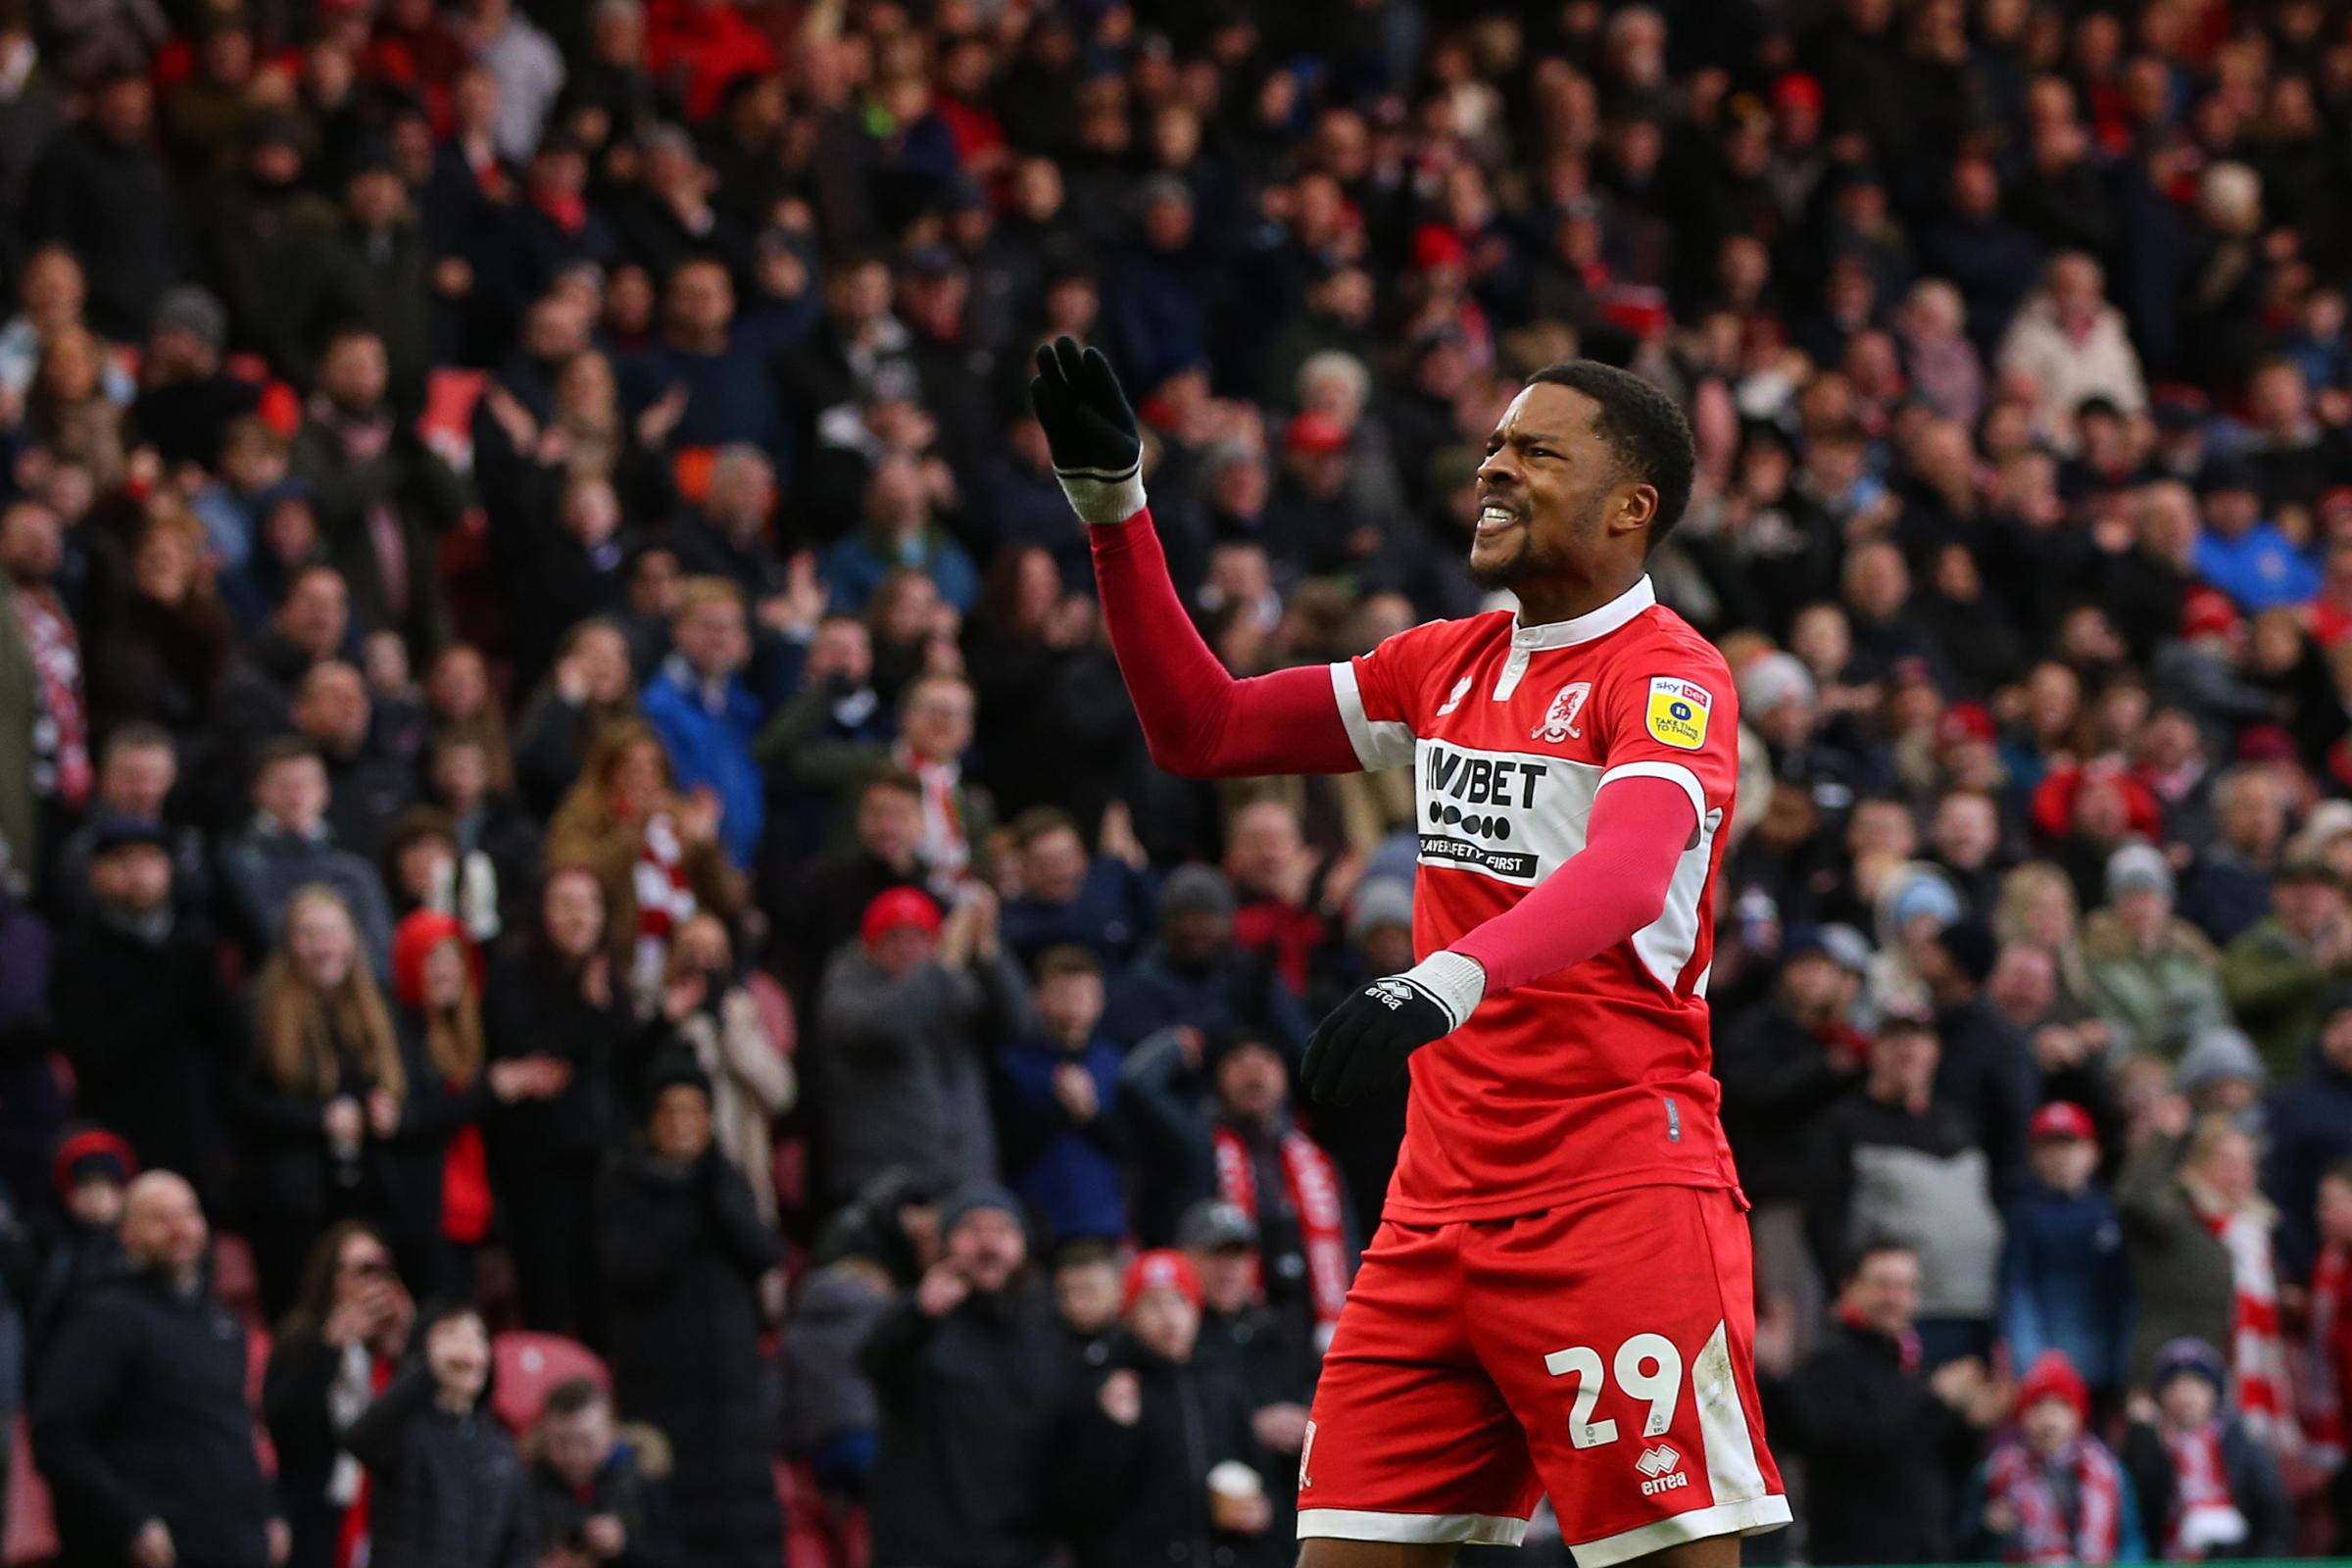 Middlesbrough 3-0 Blackpool: Akpom and McNair strike for Boro